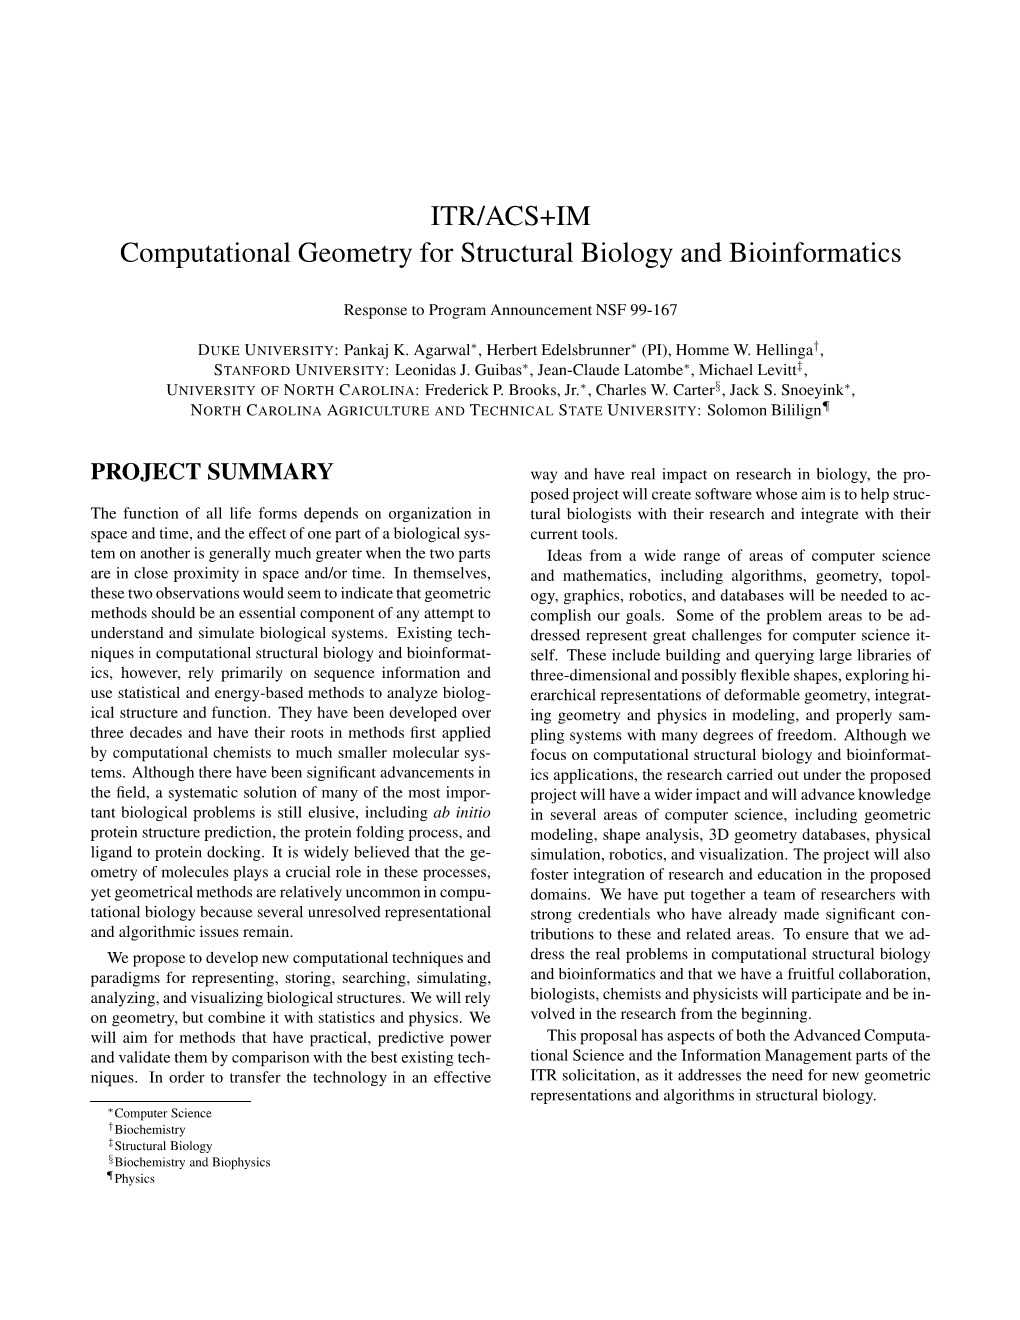 ITR/ACS+IM Computational Geometry for Structural Biology and Bioinformatics